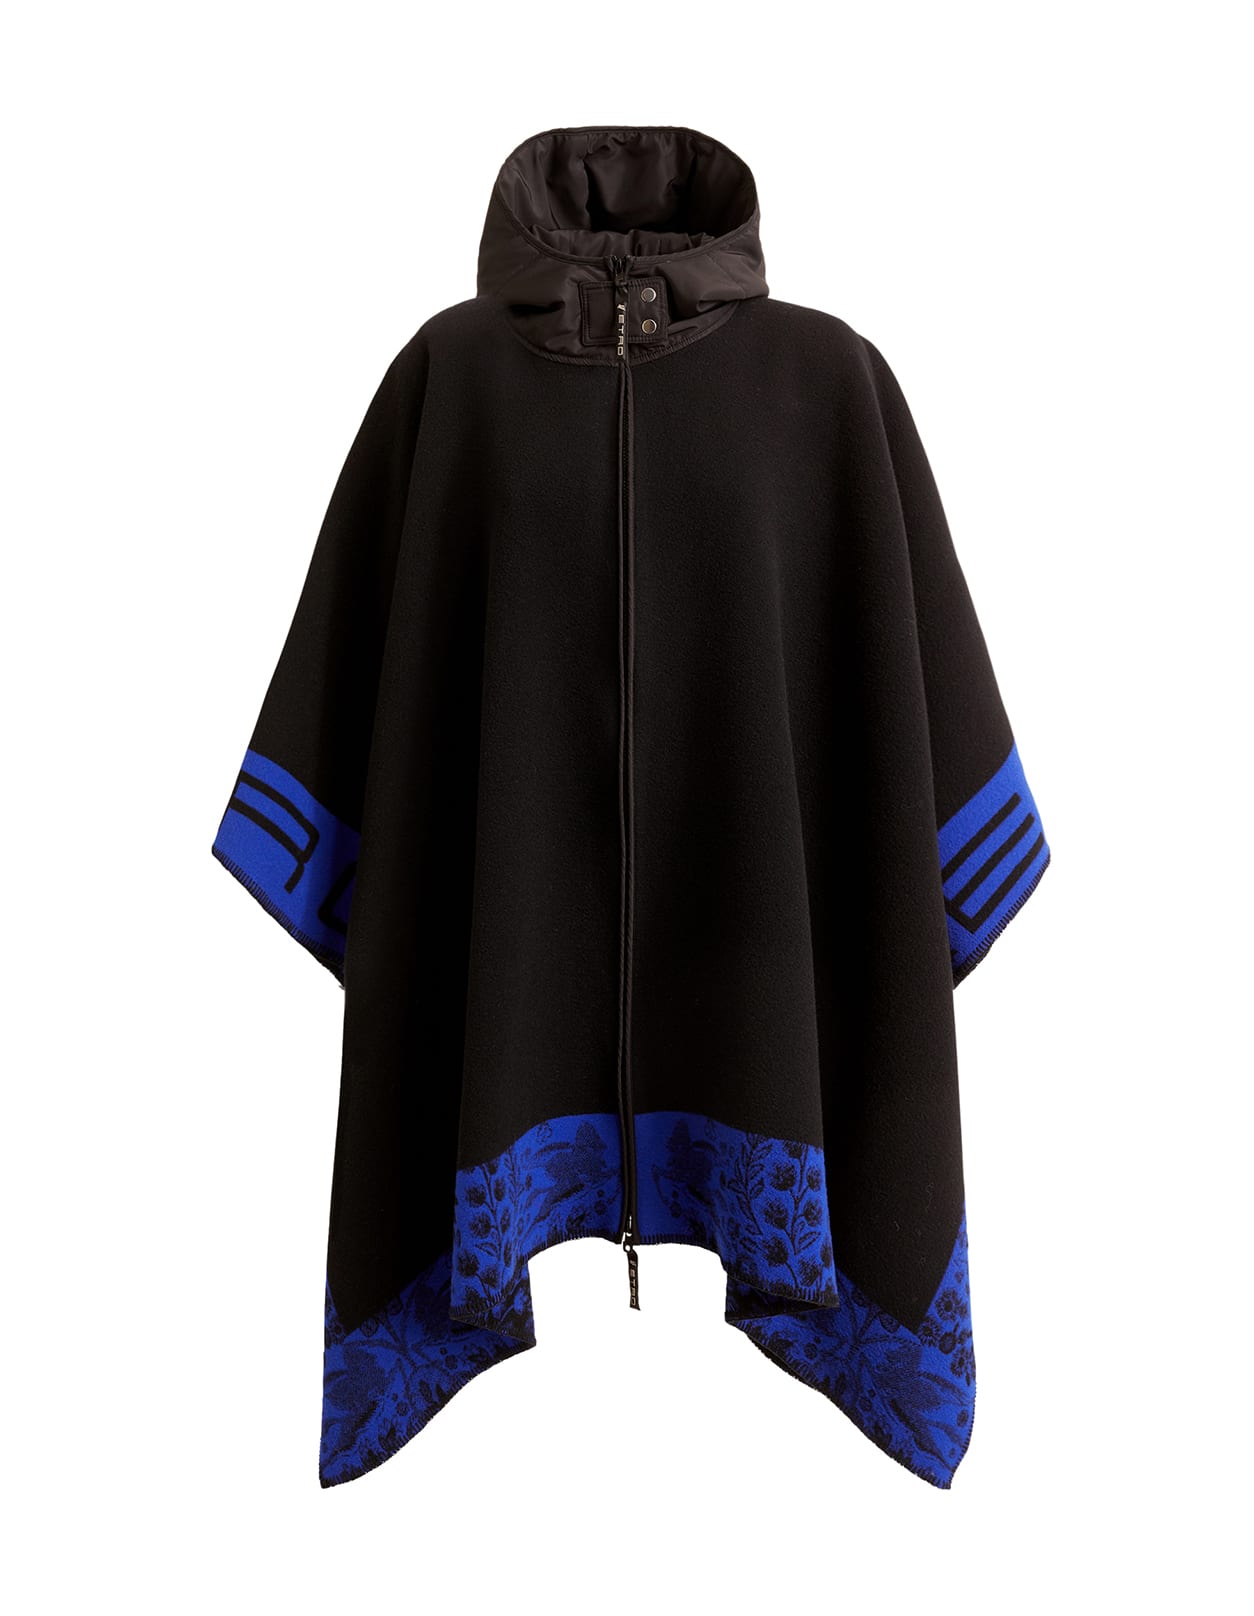 Etro Woman Cape In Black And Blue Jacquard Wool With Logo